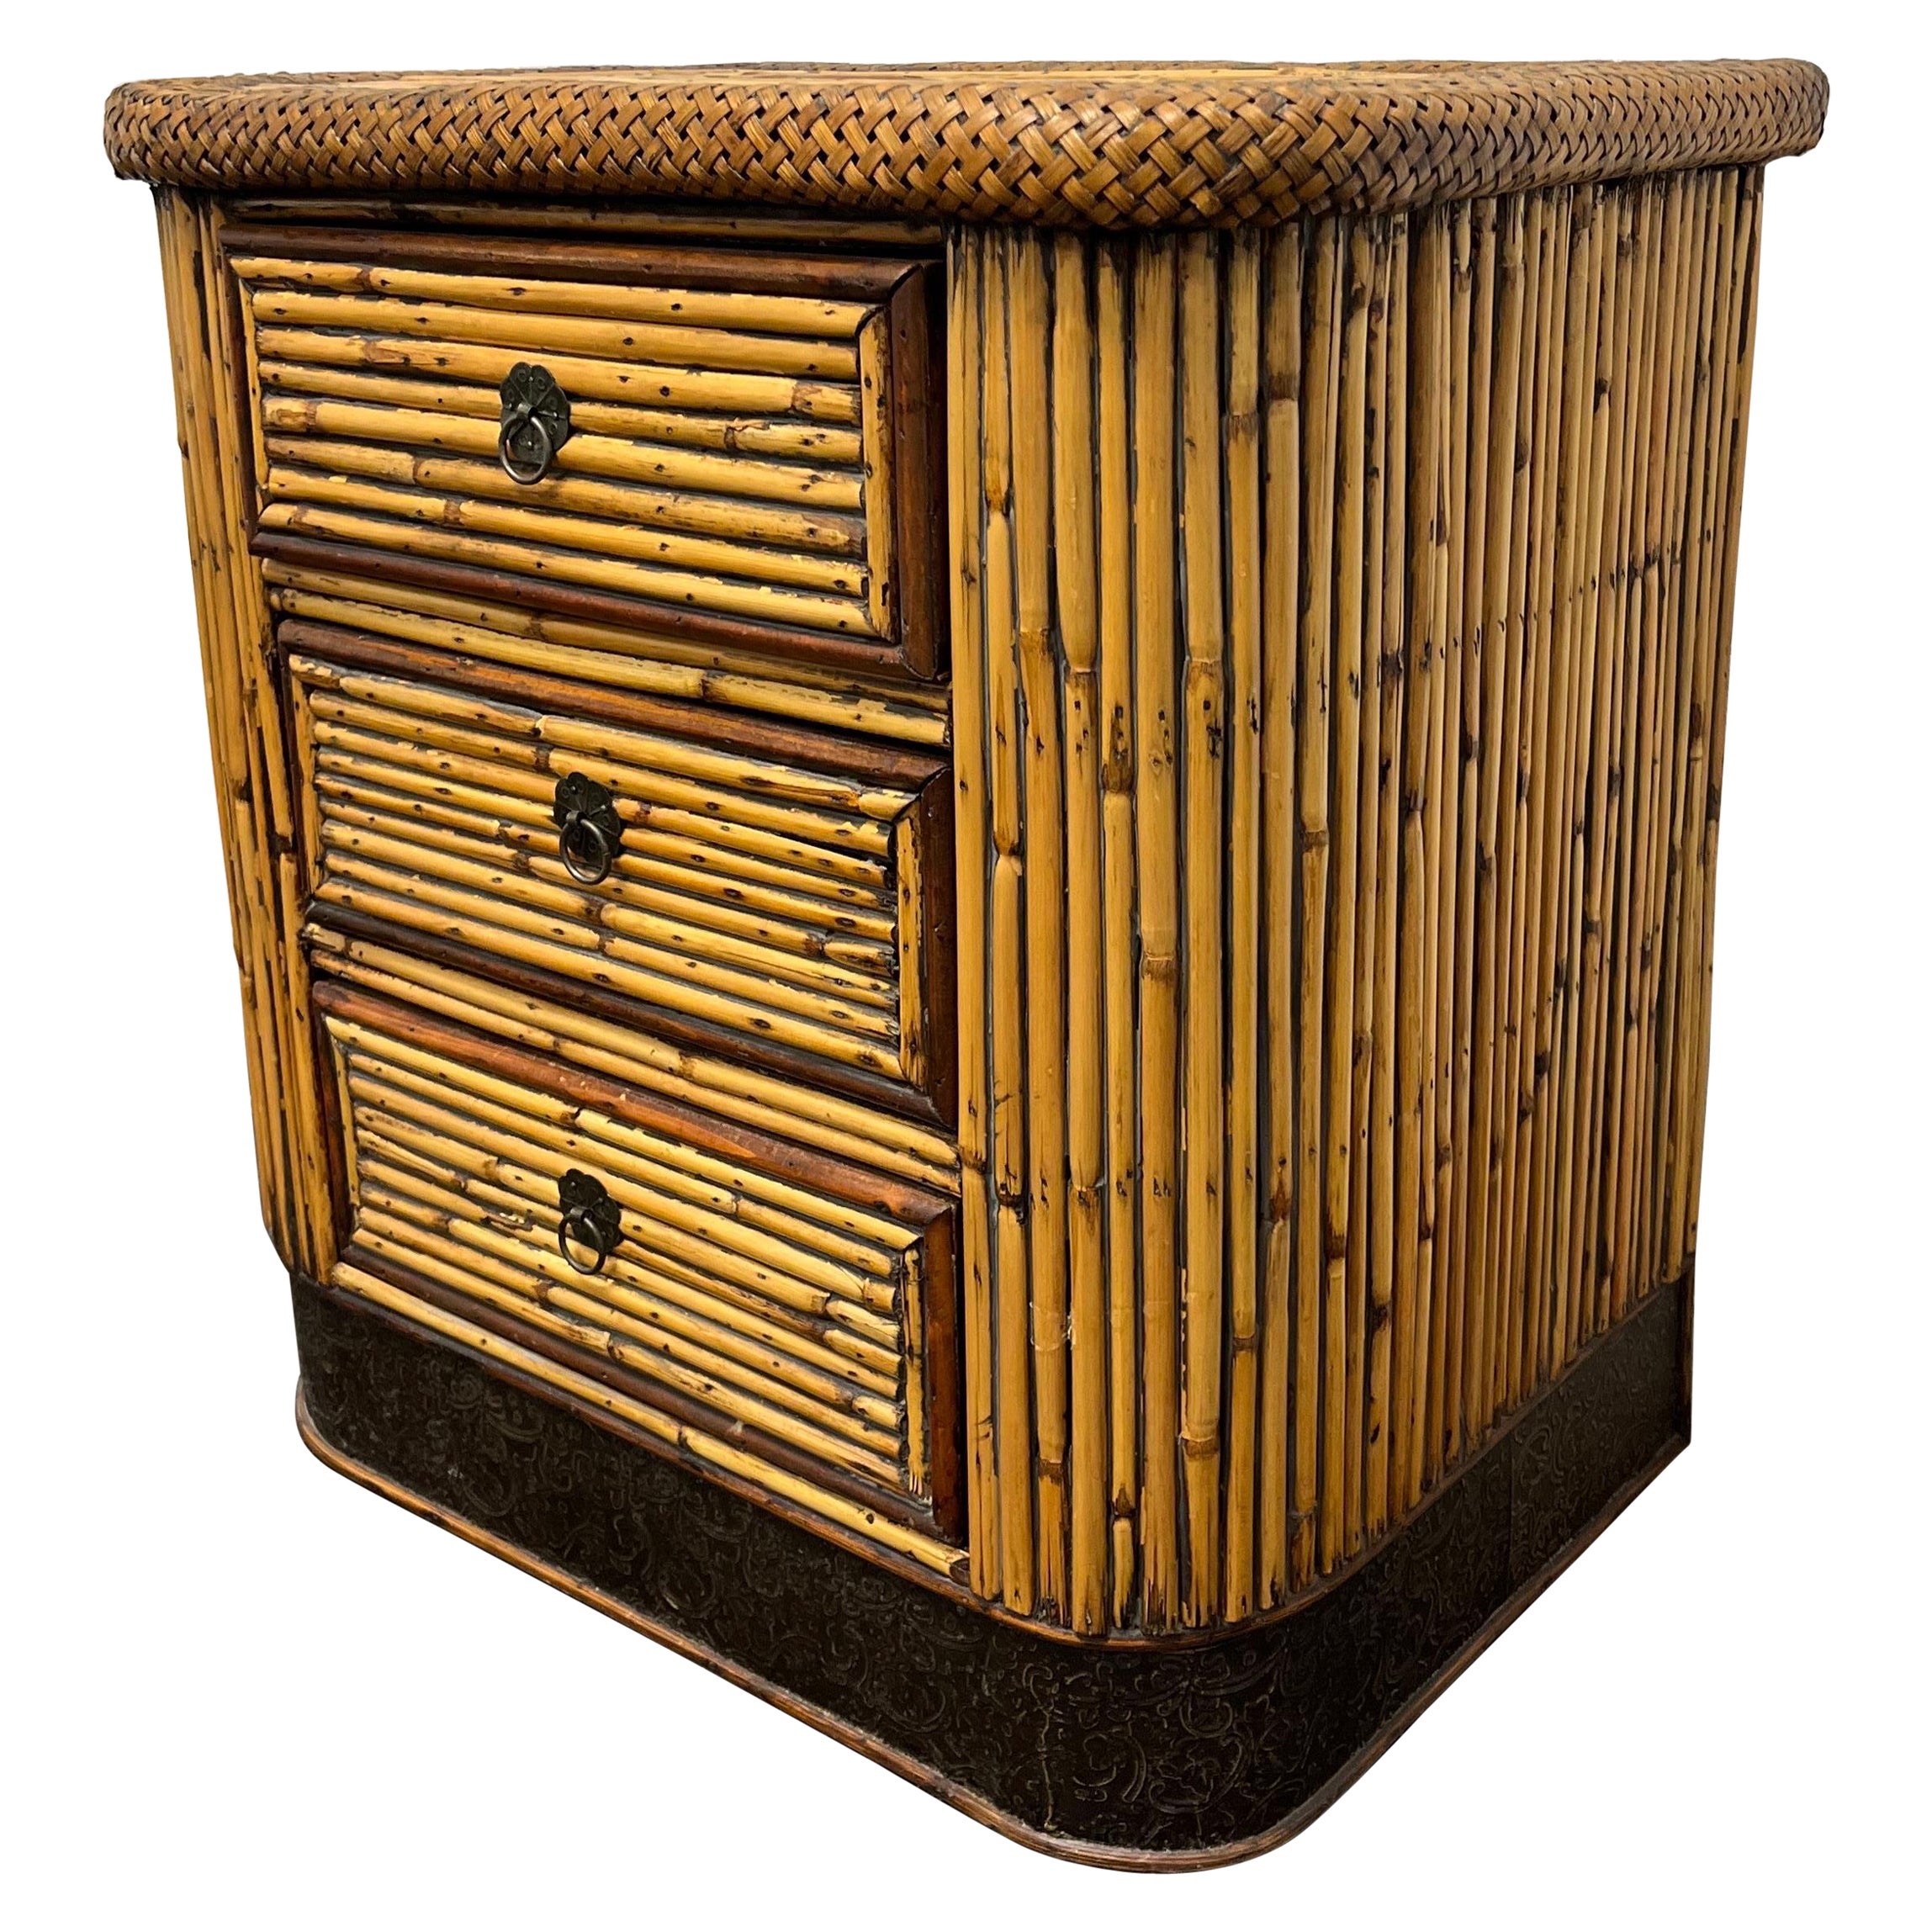 Vintage BoHo Chic Pencil Reed End Table with Drawers